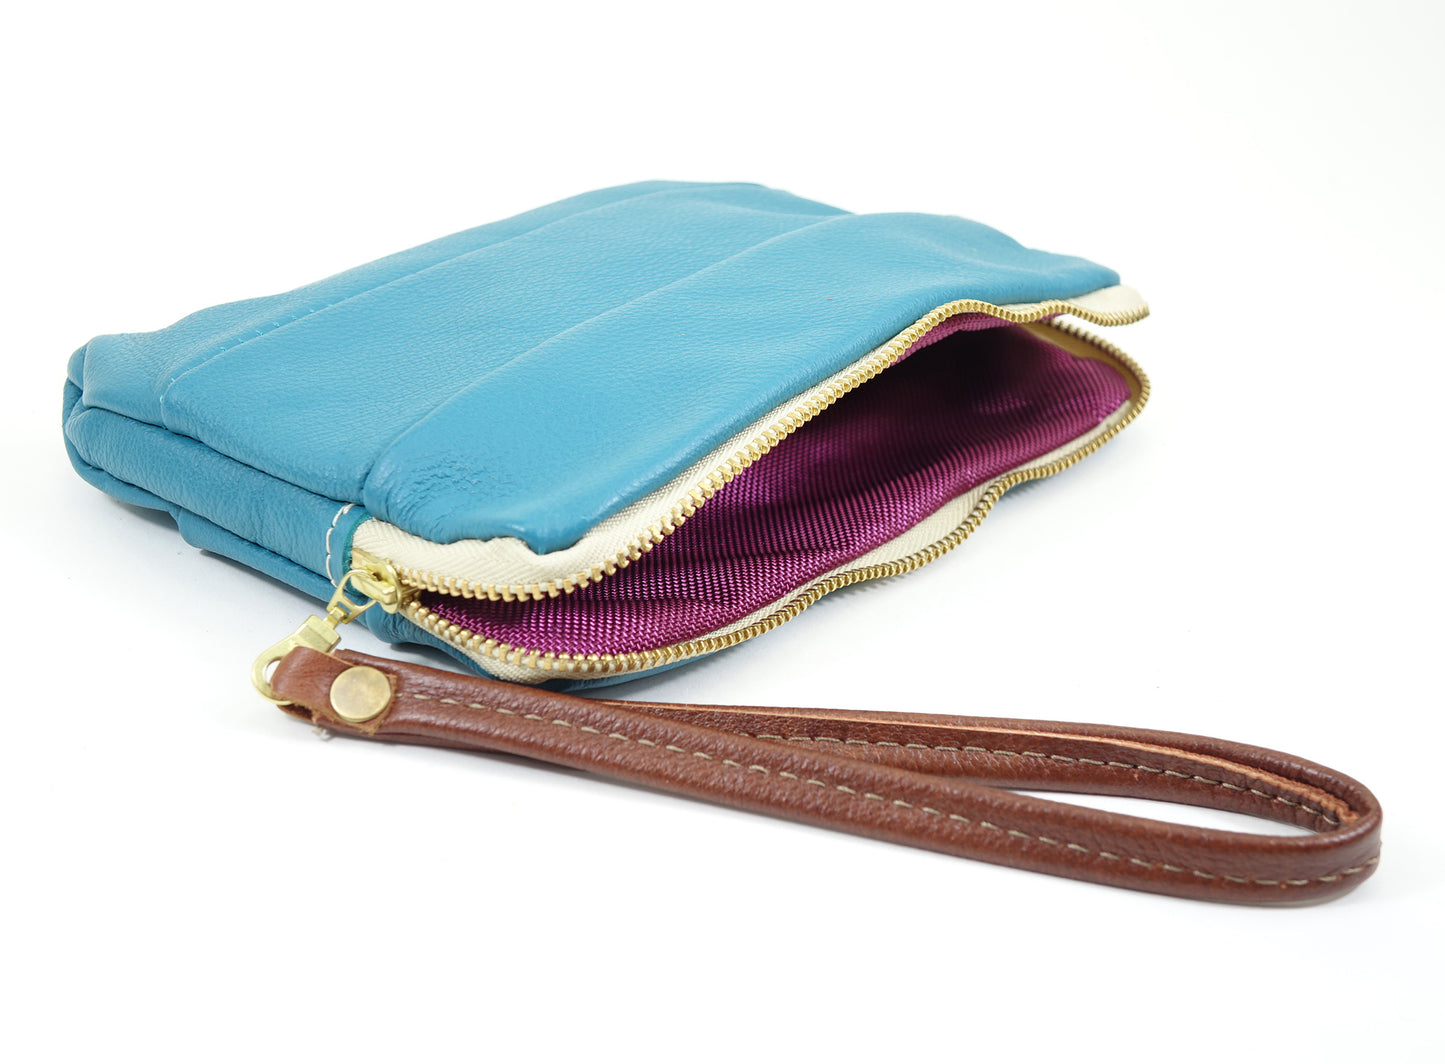 Leather Zip Pouch - Teal Blue